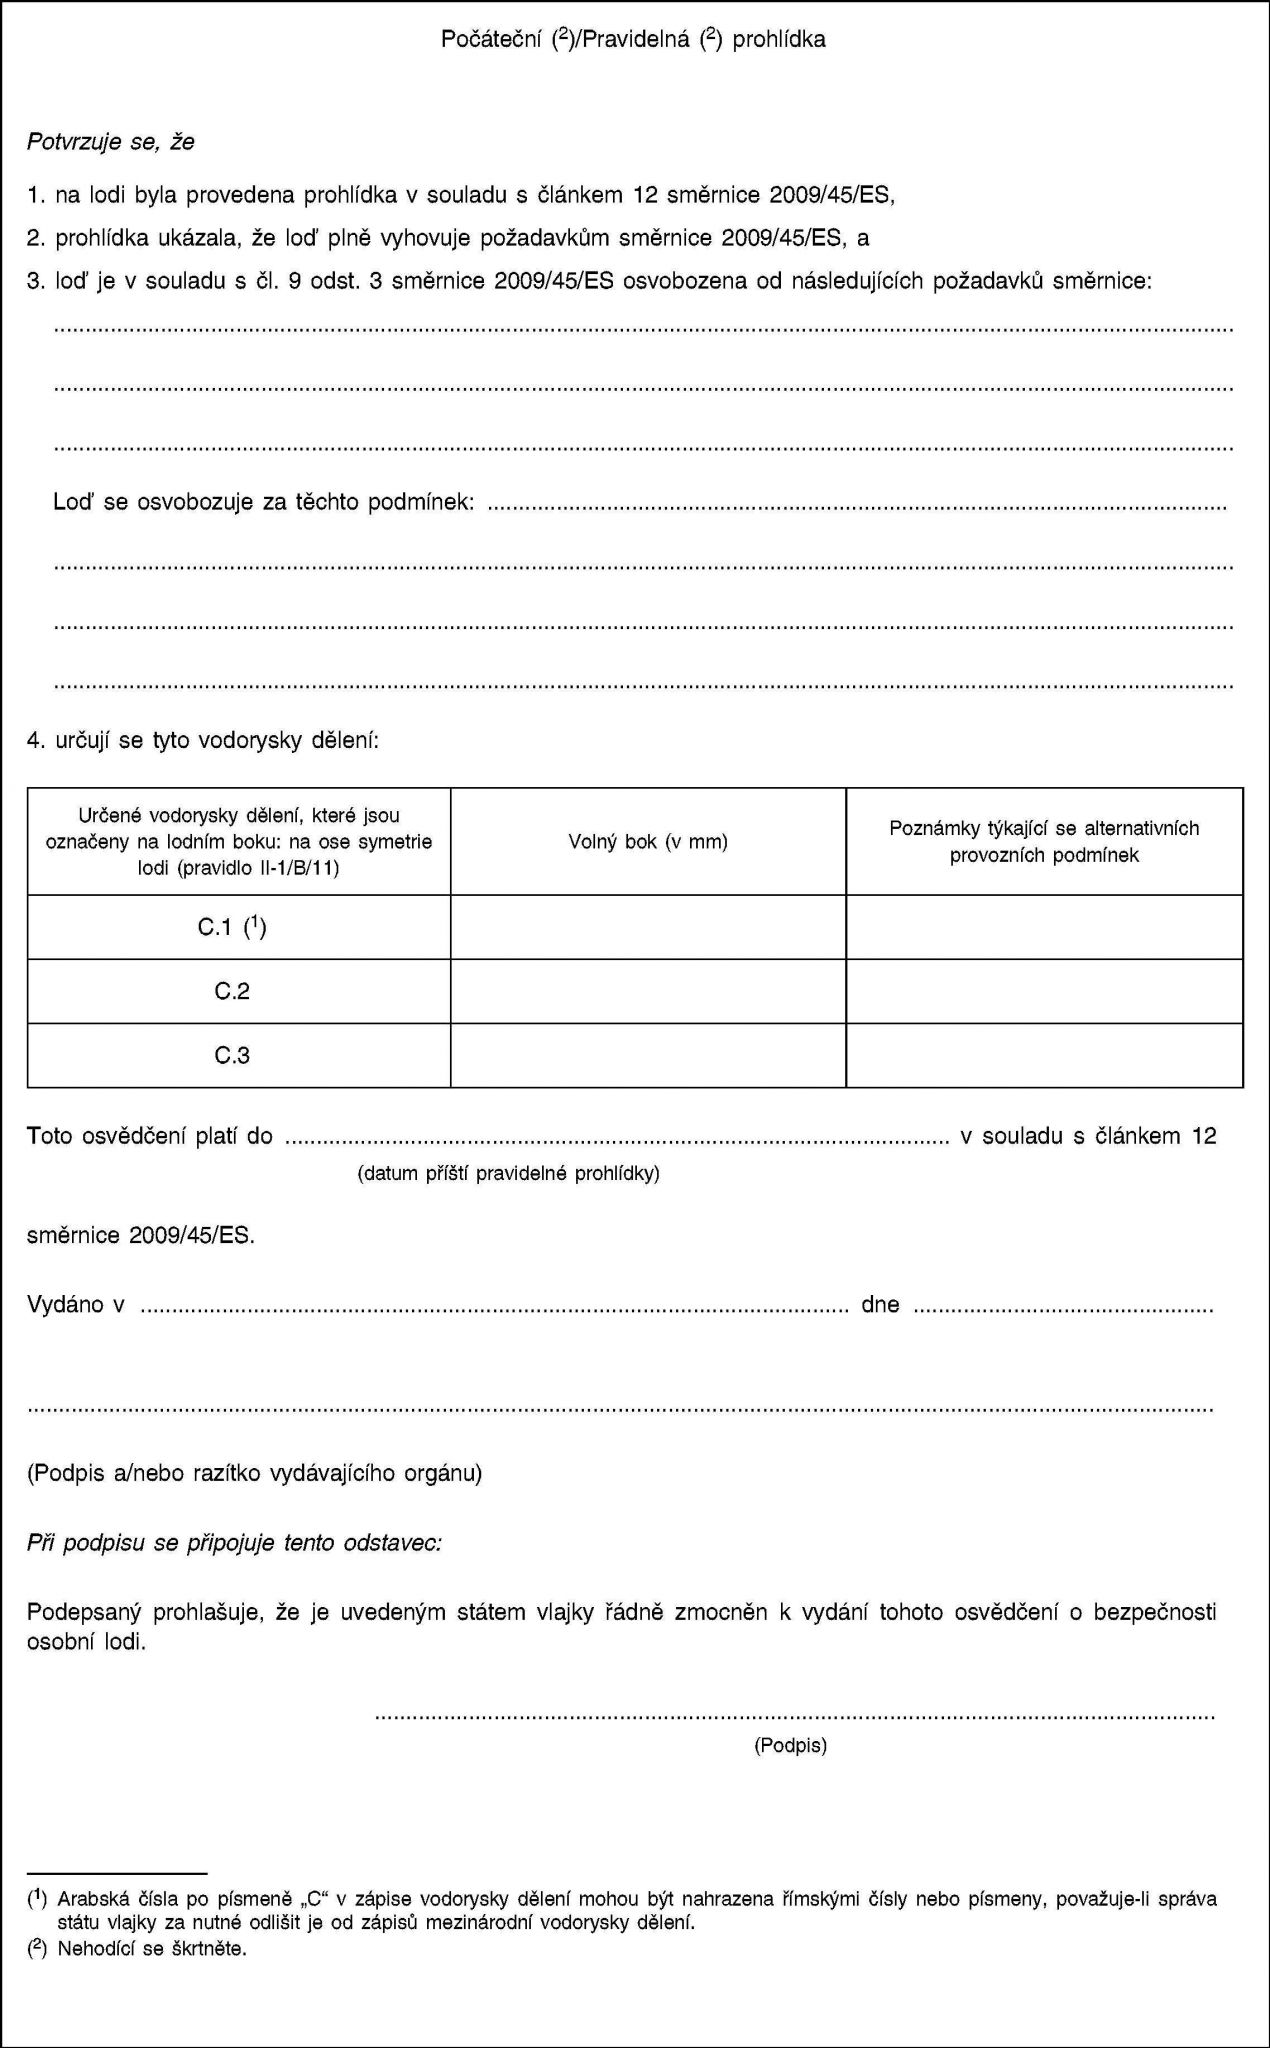 Constitutional Principles Worksheet Answers and Chapter 3 Section 1 Basic Principles Worksheet Answers New Beautiful